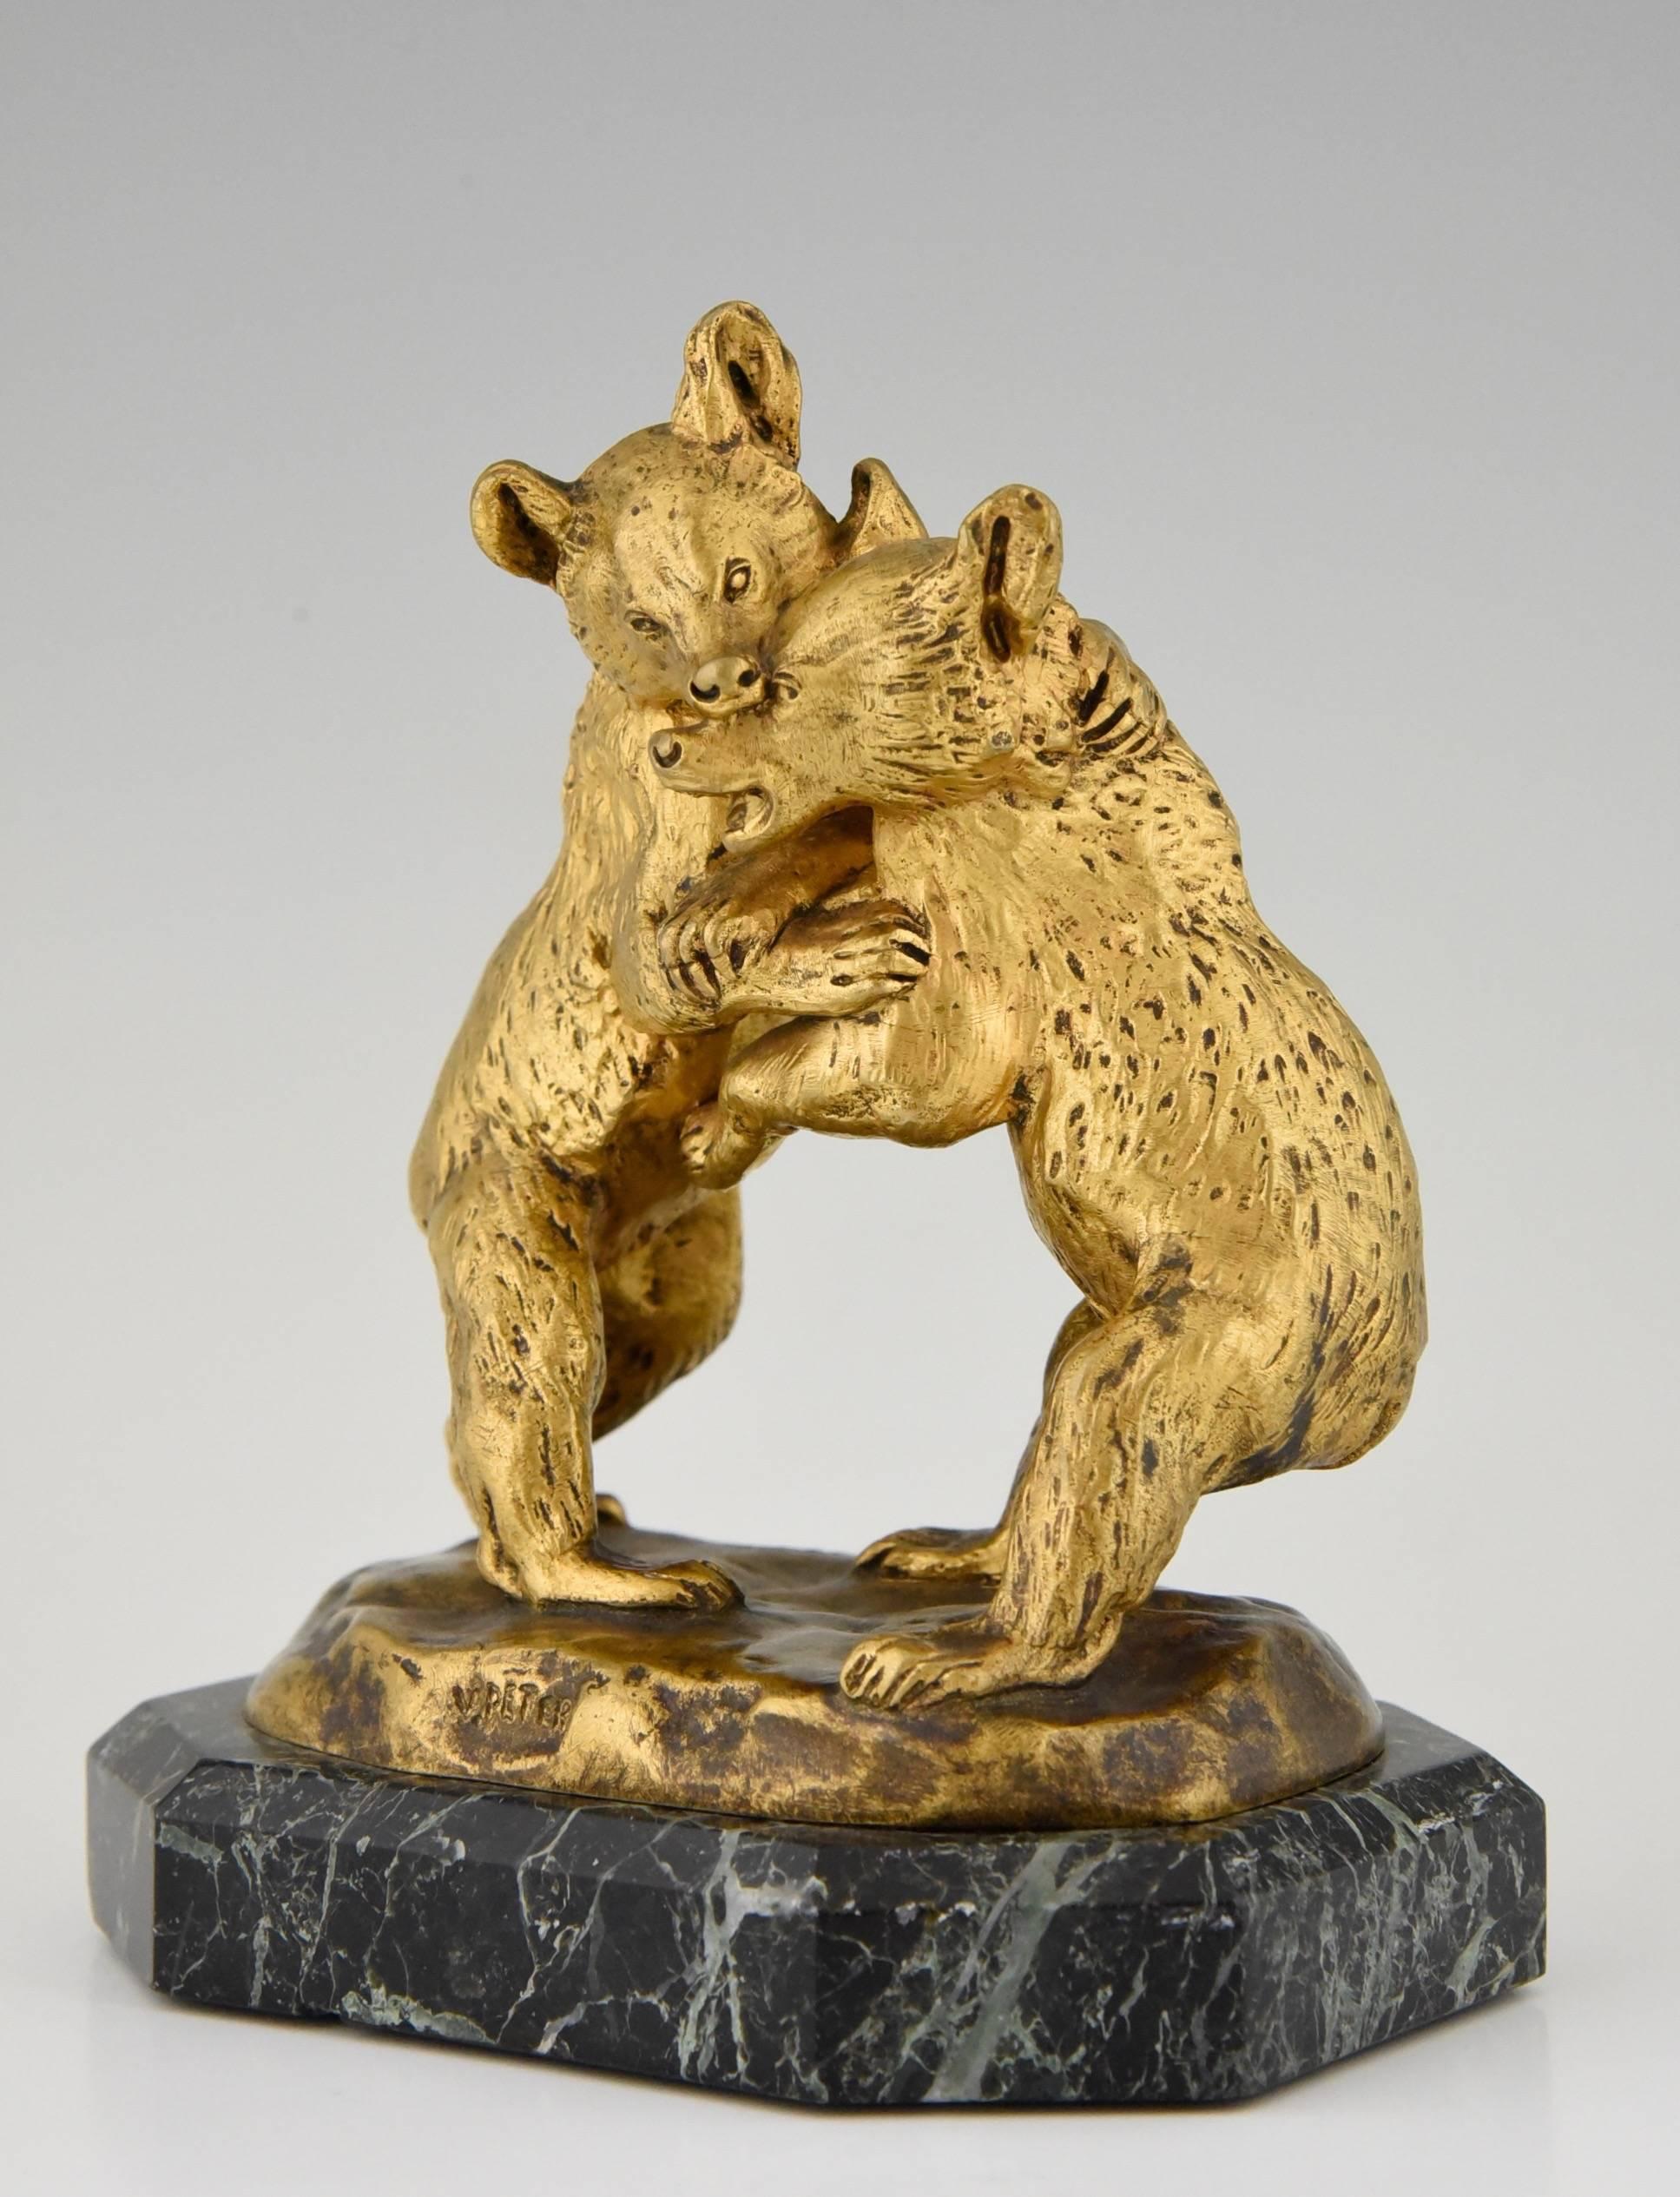 A gilt bronze group of two bears playing by Victor Peter with Susse frères foundry seal. 

You will find an illustration of this bronze on page 505 of
“Dictionnaire illustré des sculpteurs animaliers & fondeurs de l’antiquité à nos jours“ by